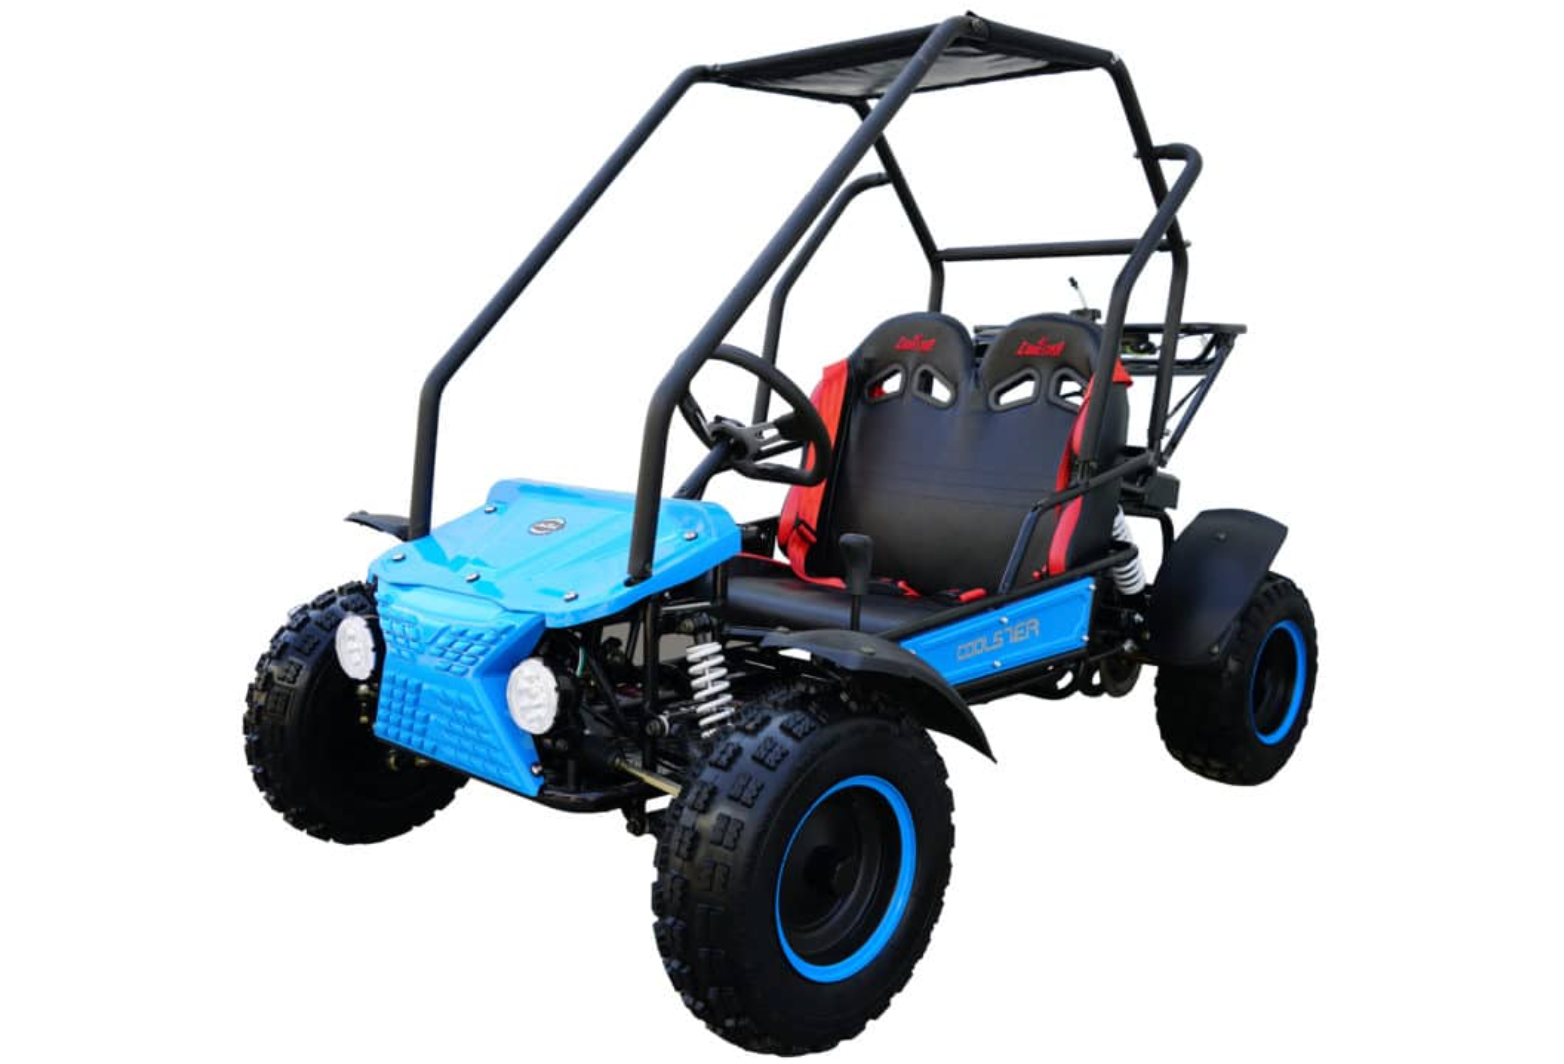 Coolster GK-6125 125cc Off Road Double Seat Gas Go Kart